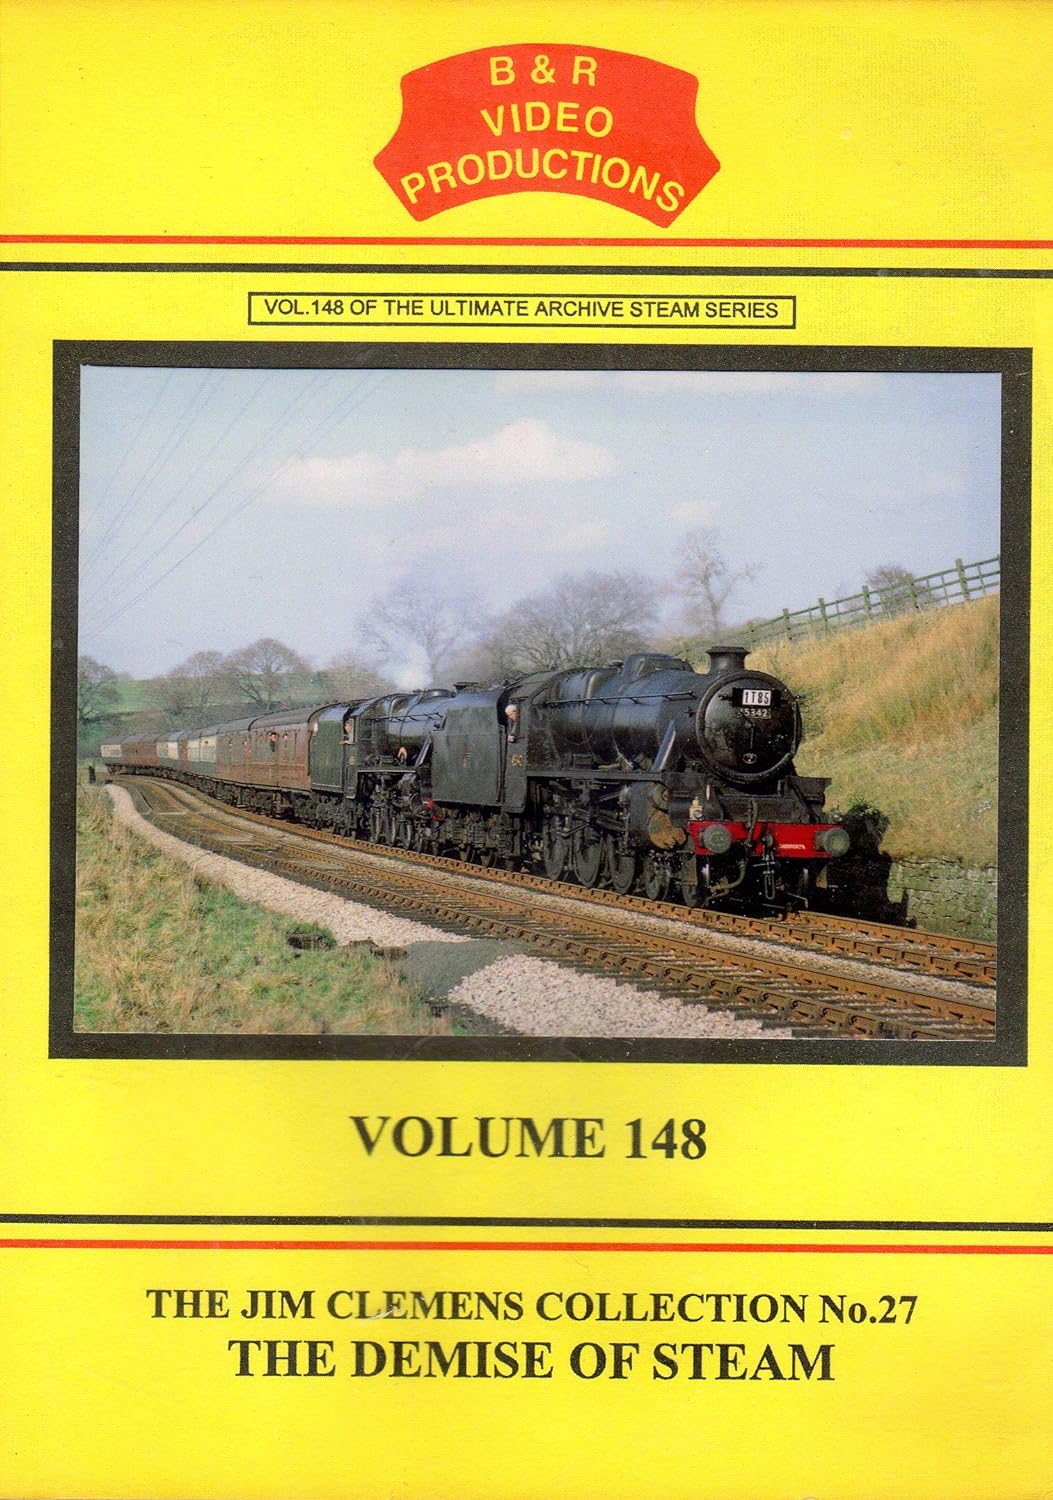 B & R Video Productions Vol 148 - The Jim Clemens collection No.27 The demise of steam 